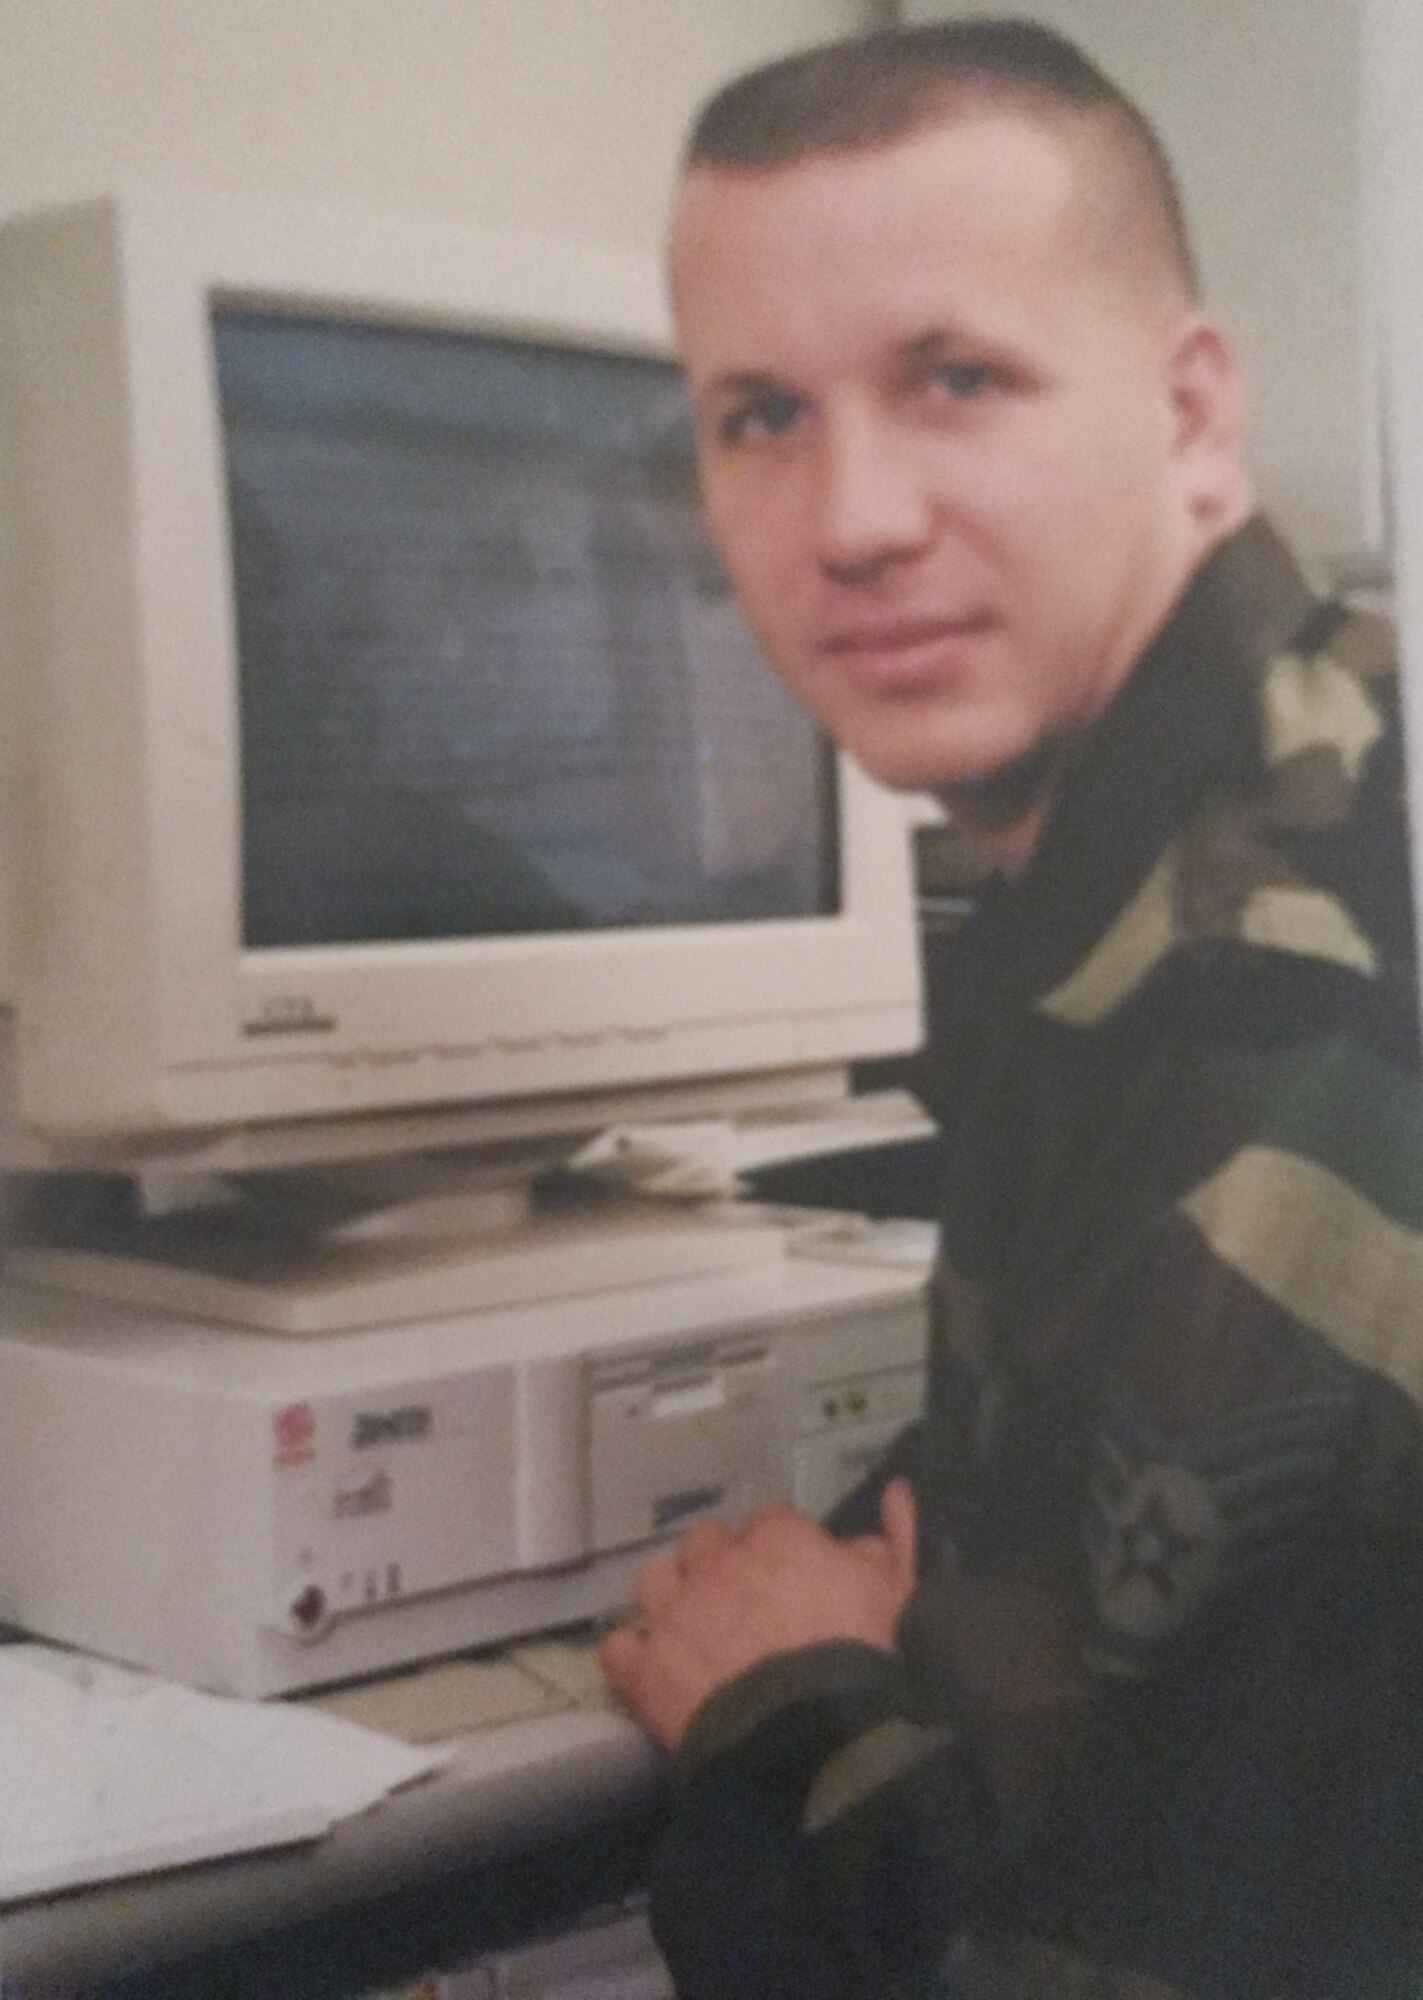 An old photo of an Airman at a computer